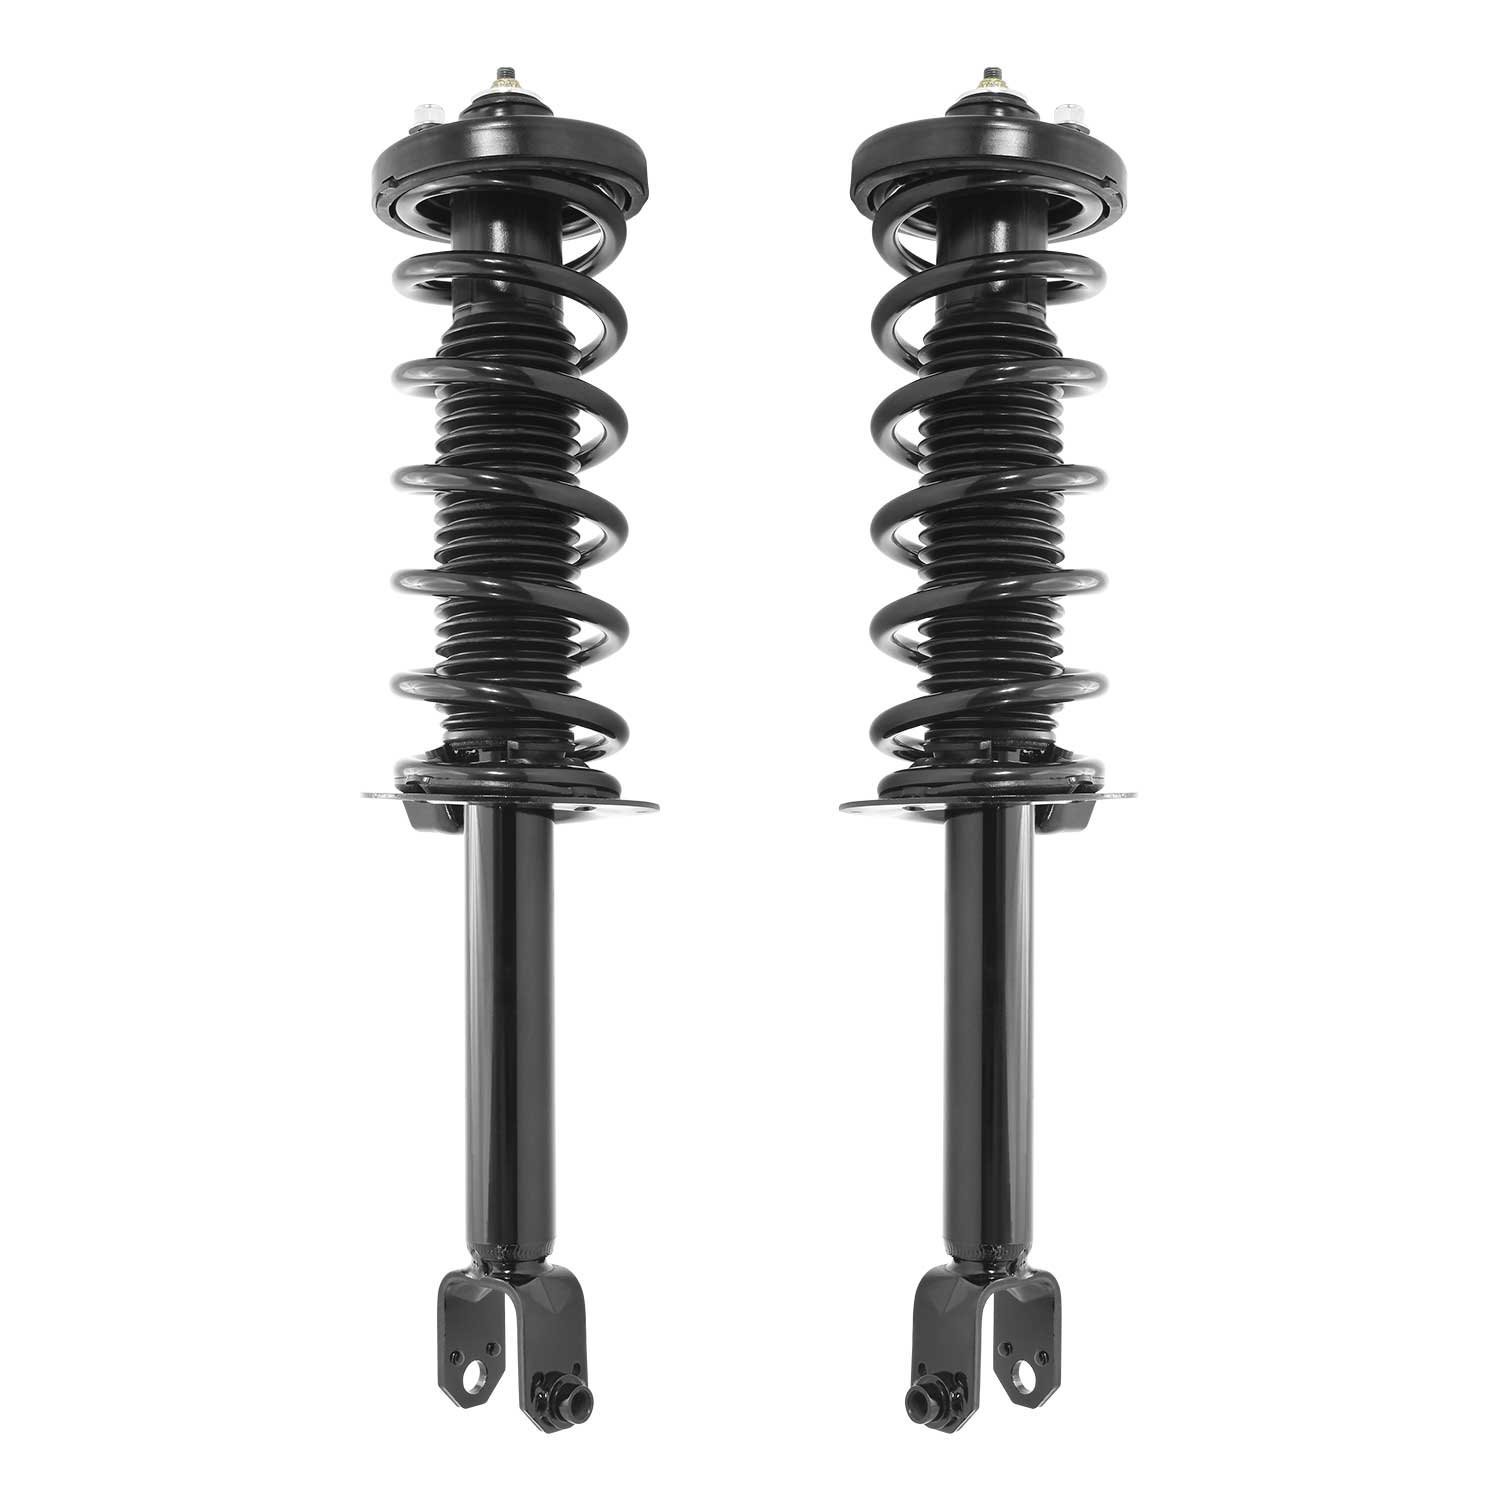 2-15971-15972-001 Suspension Strut & Coil Spring Assembly Set Fits Select Honda Accord